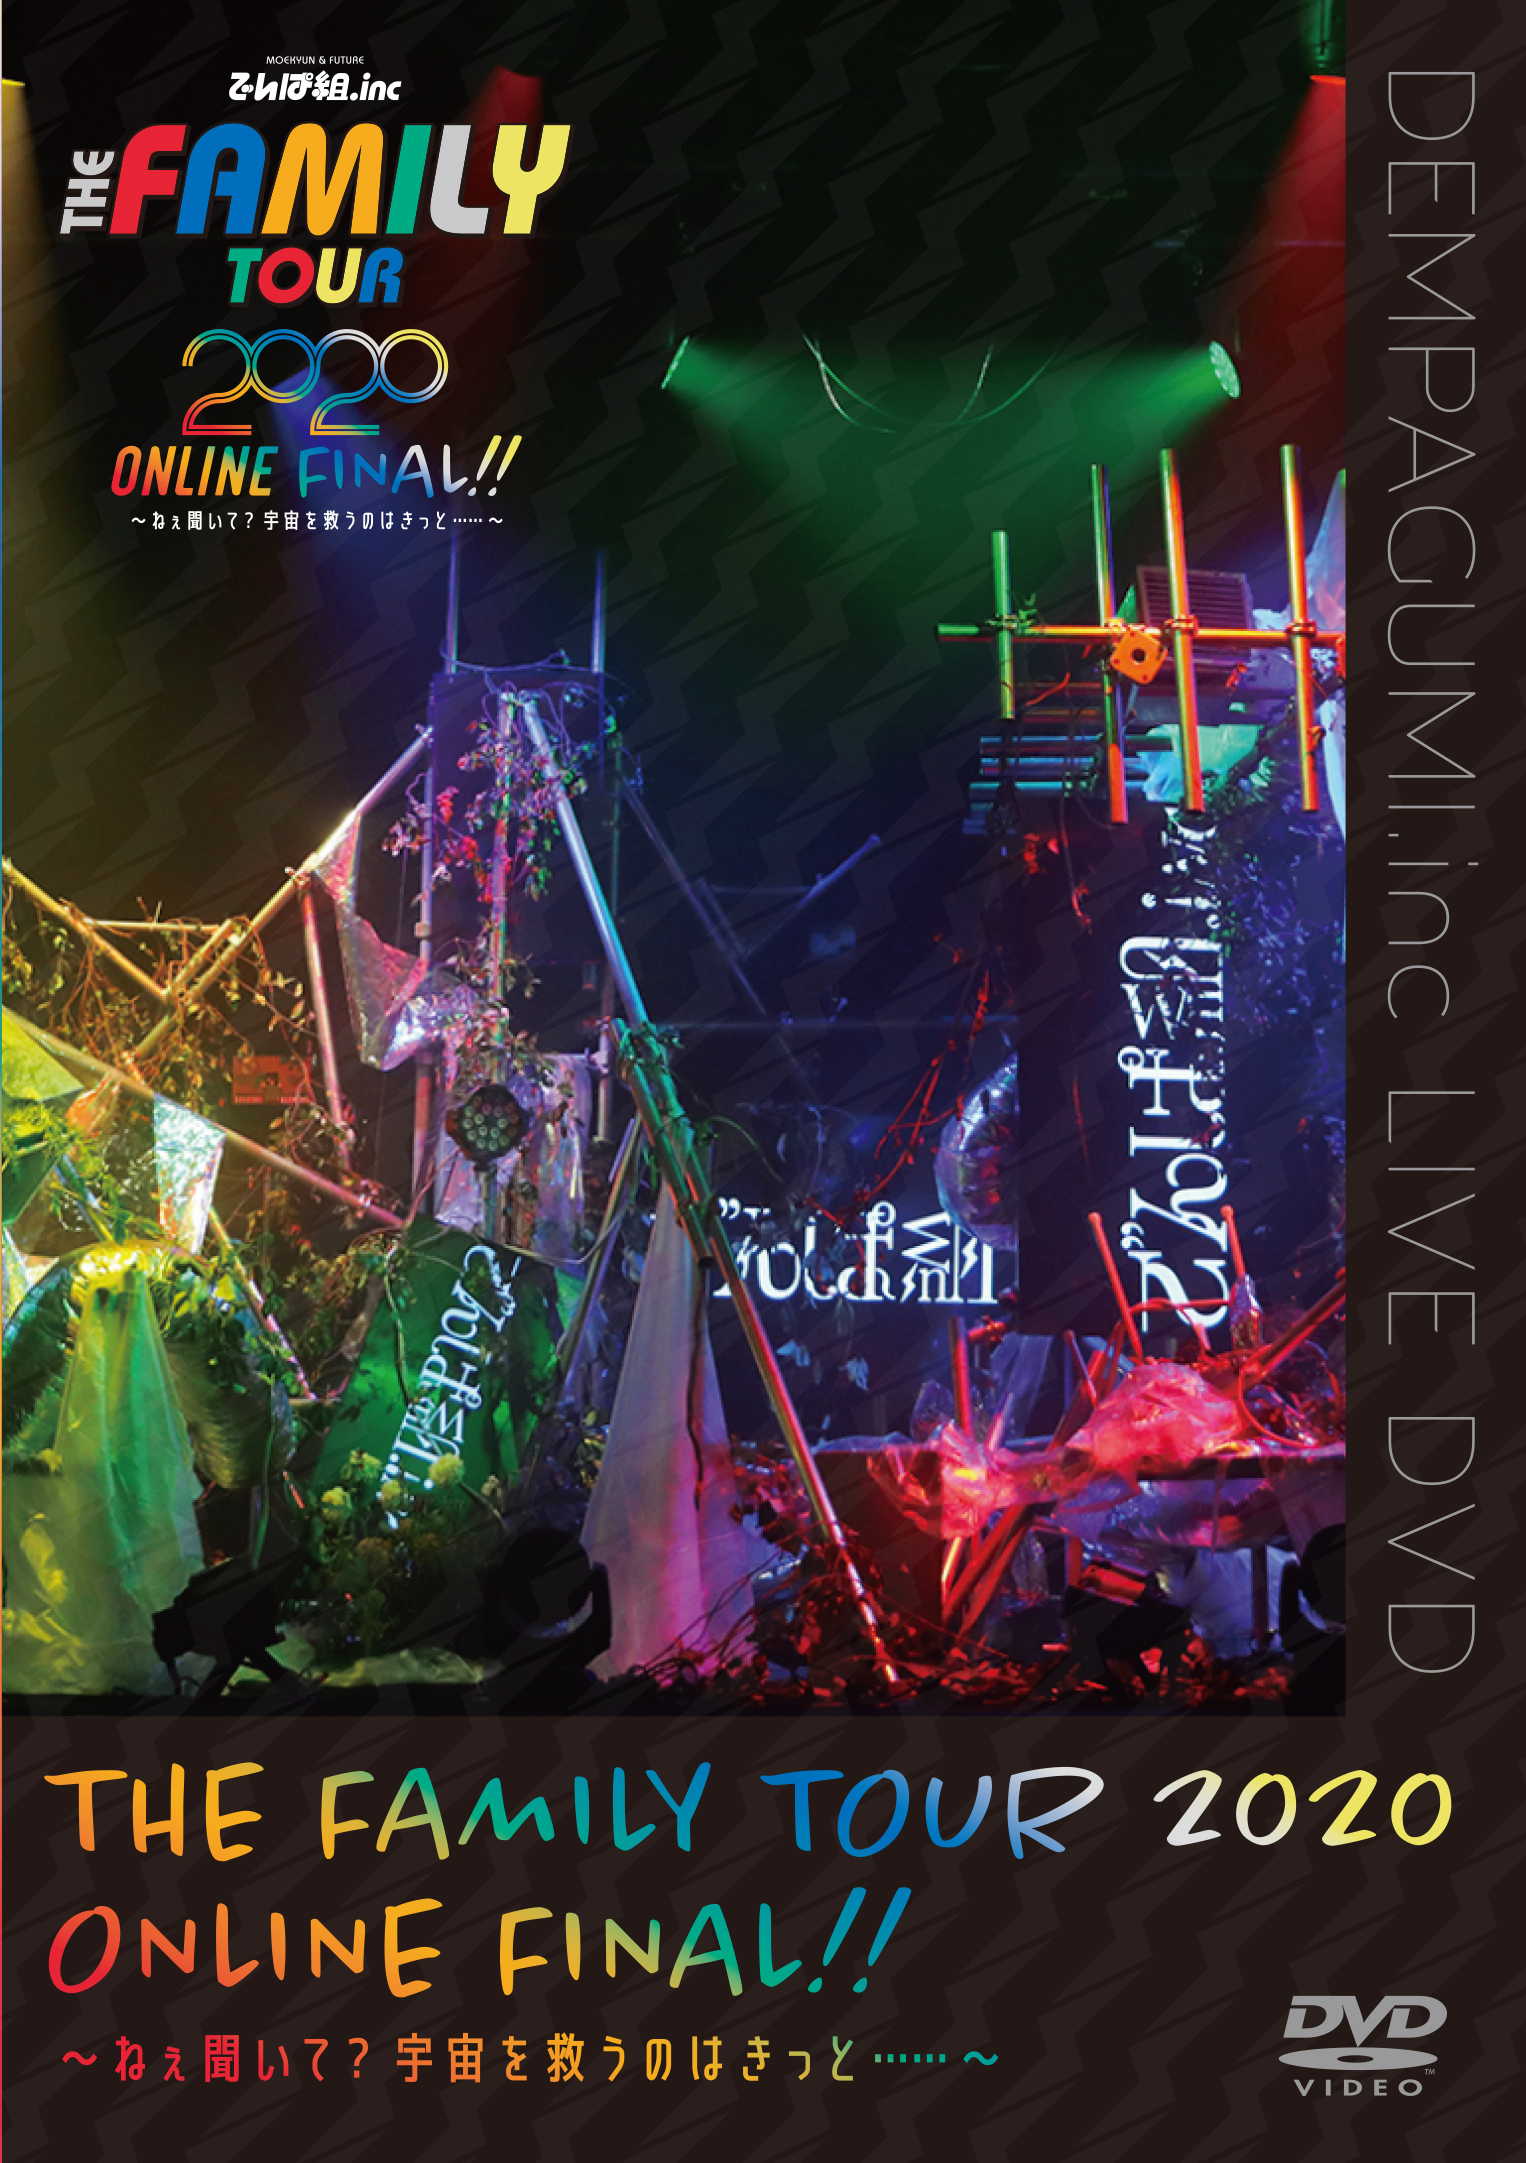 THE FAMILY TOUR 2020 ONLINE FINAL!! ねぇ聞いて？宇宙を救う